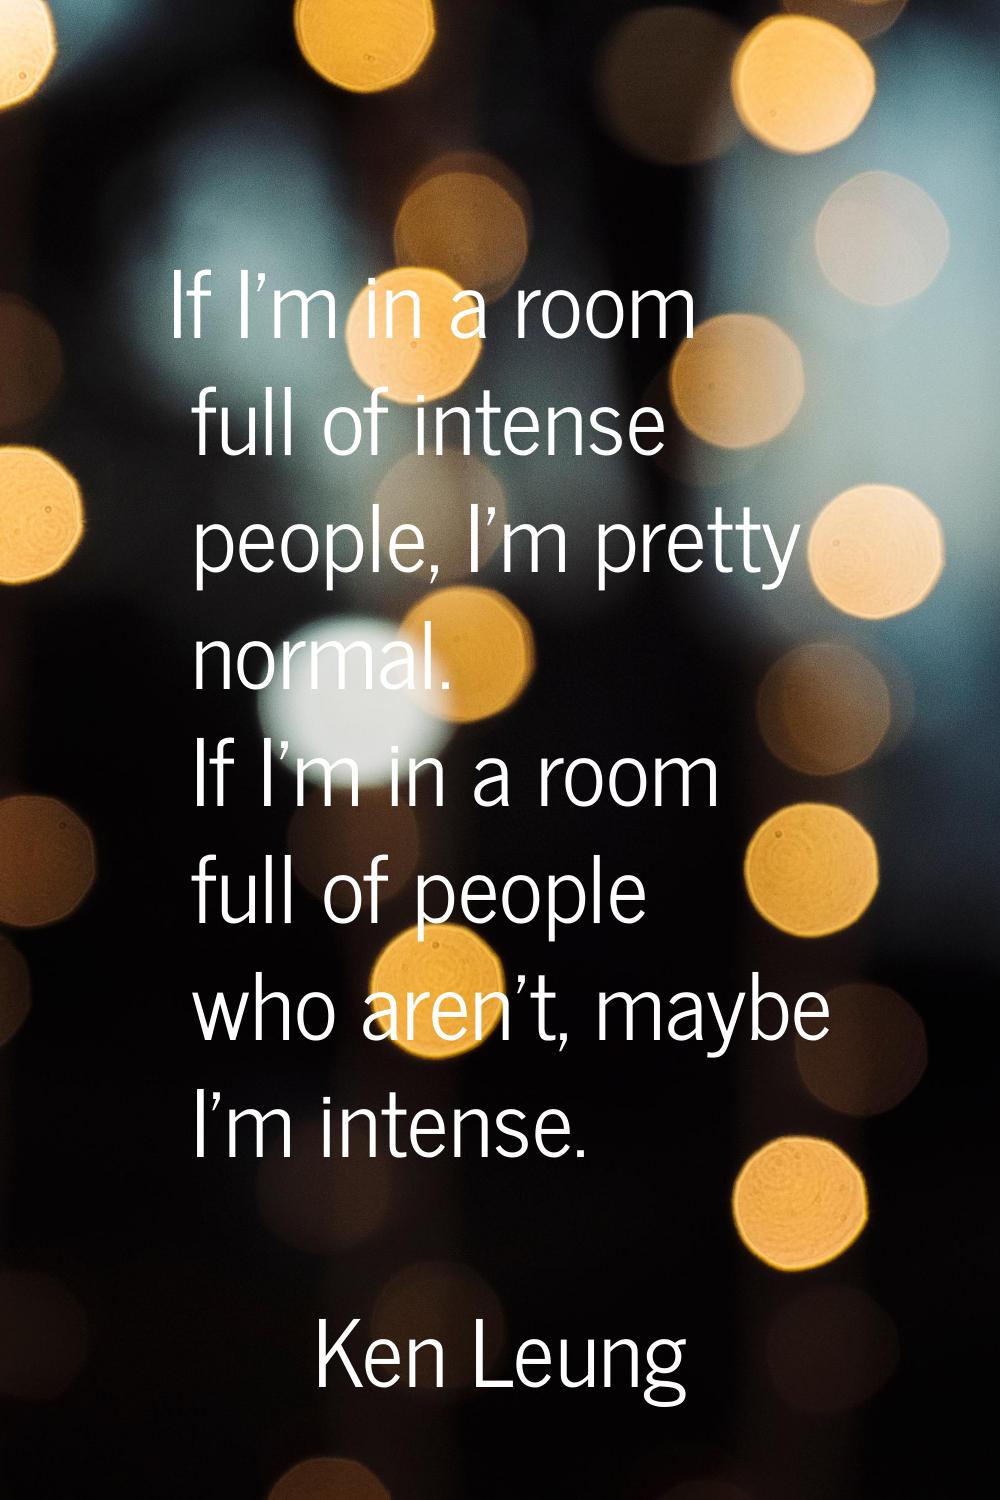 If I'm in a room full of intense people, I'm pretty normal. If I'm in a room full of people who are